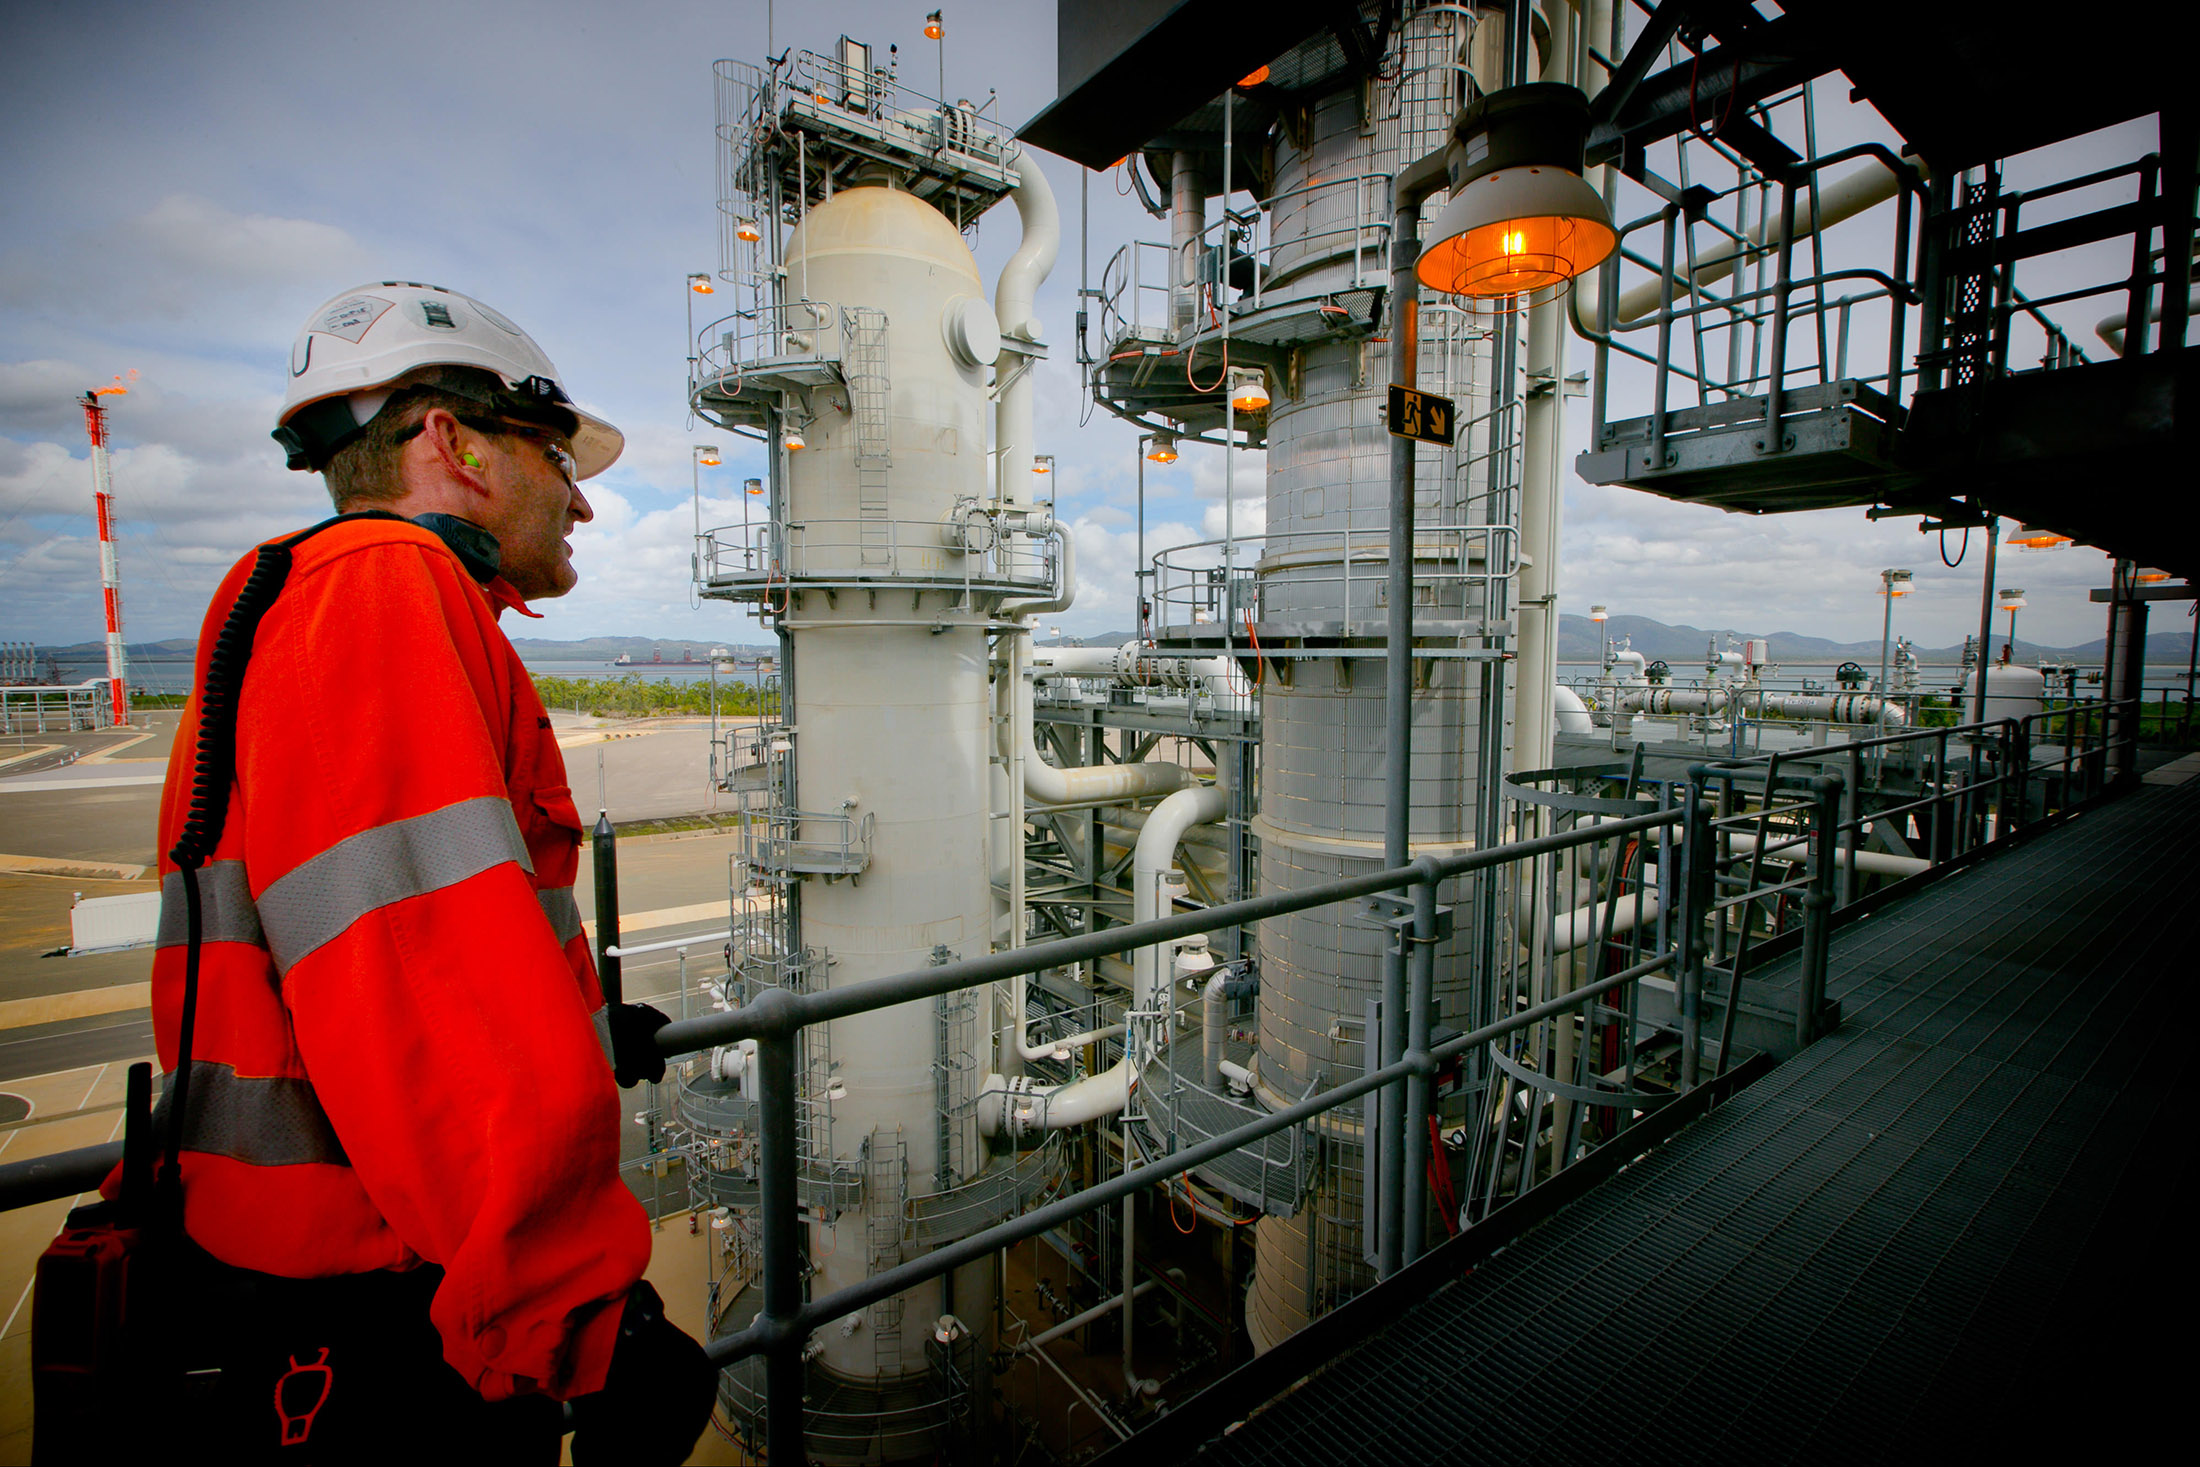 A worker crosses a walkway at a plant at the Queensland Curtis Liquefied Natural Gas (QCLNG) project site, operated by QGC Pty, a unit of Royal Dutch Shell Plc, in Gladstone, Australia, on Wednesday, June 15, 2016. Gas from more than 2,500 wells travels hundreds of miles by pipeline to the project, where it's chilled and pumped into 10-story-high tanks before being loaded onto massive ships.
